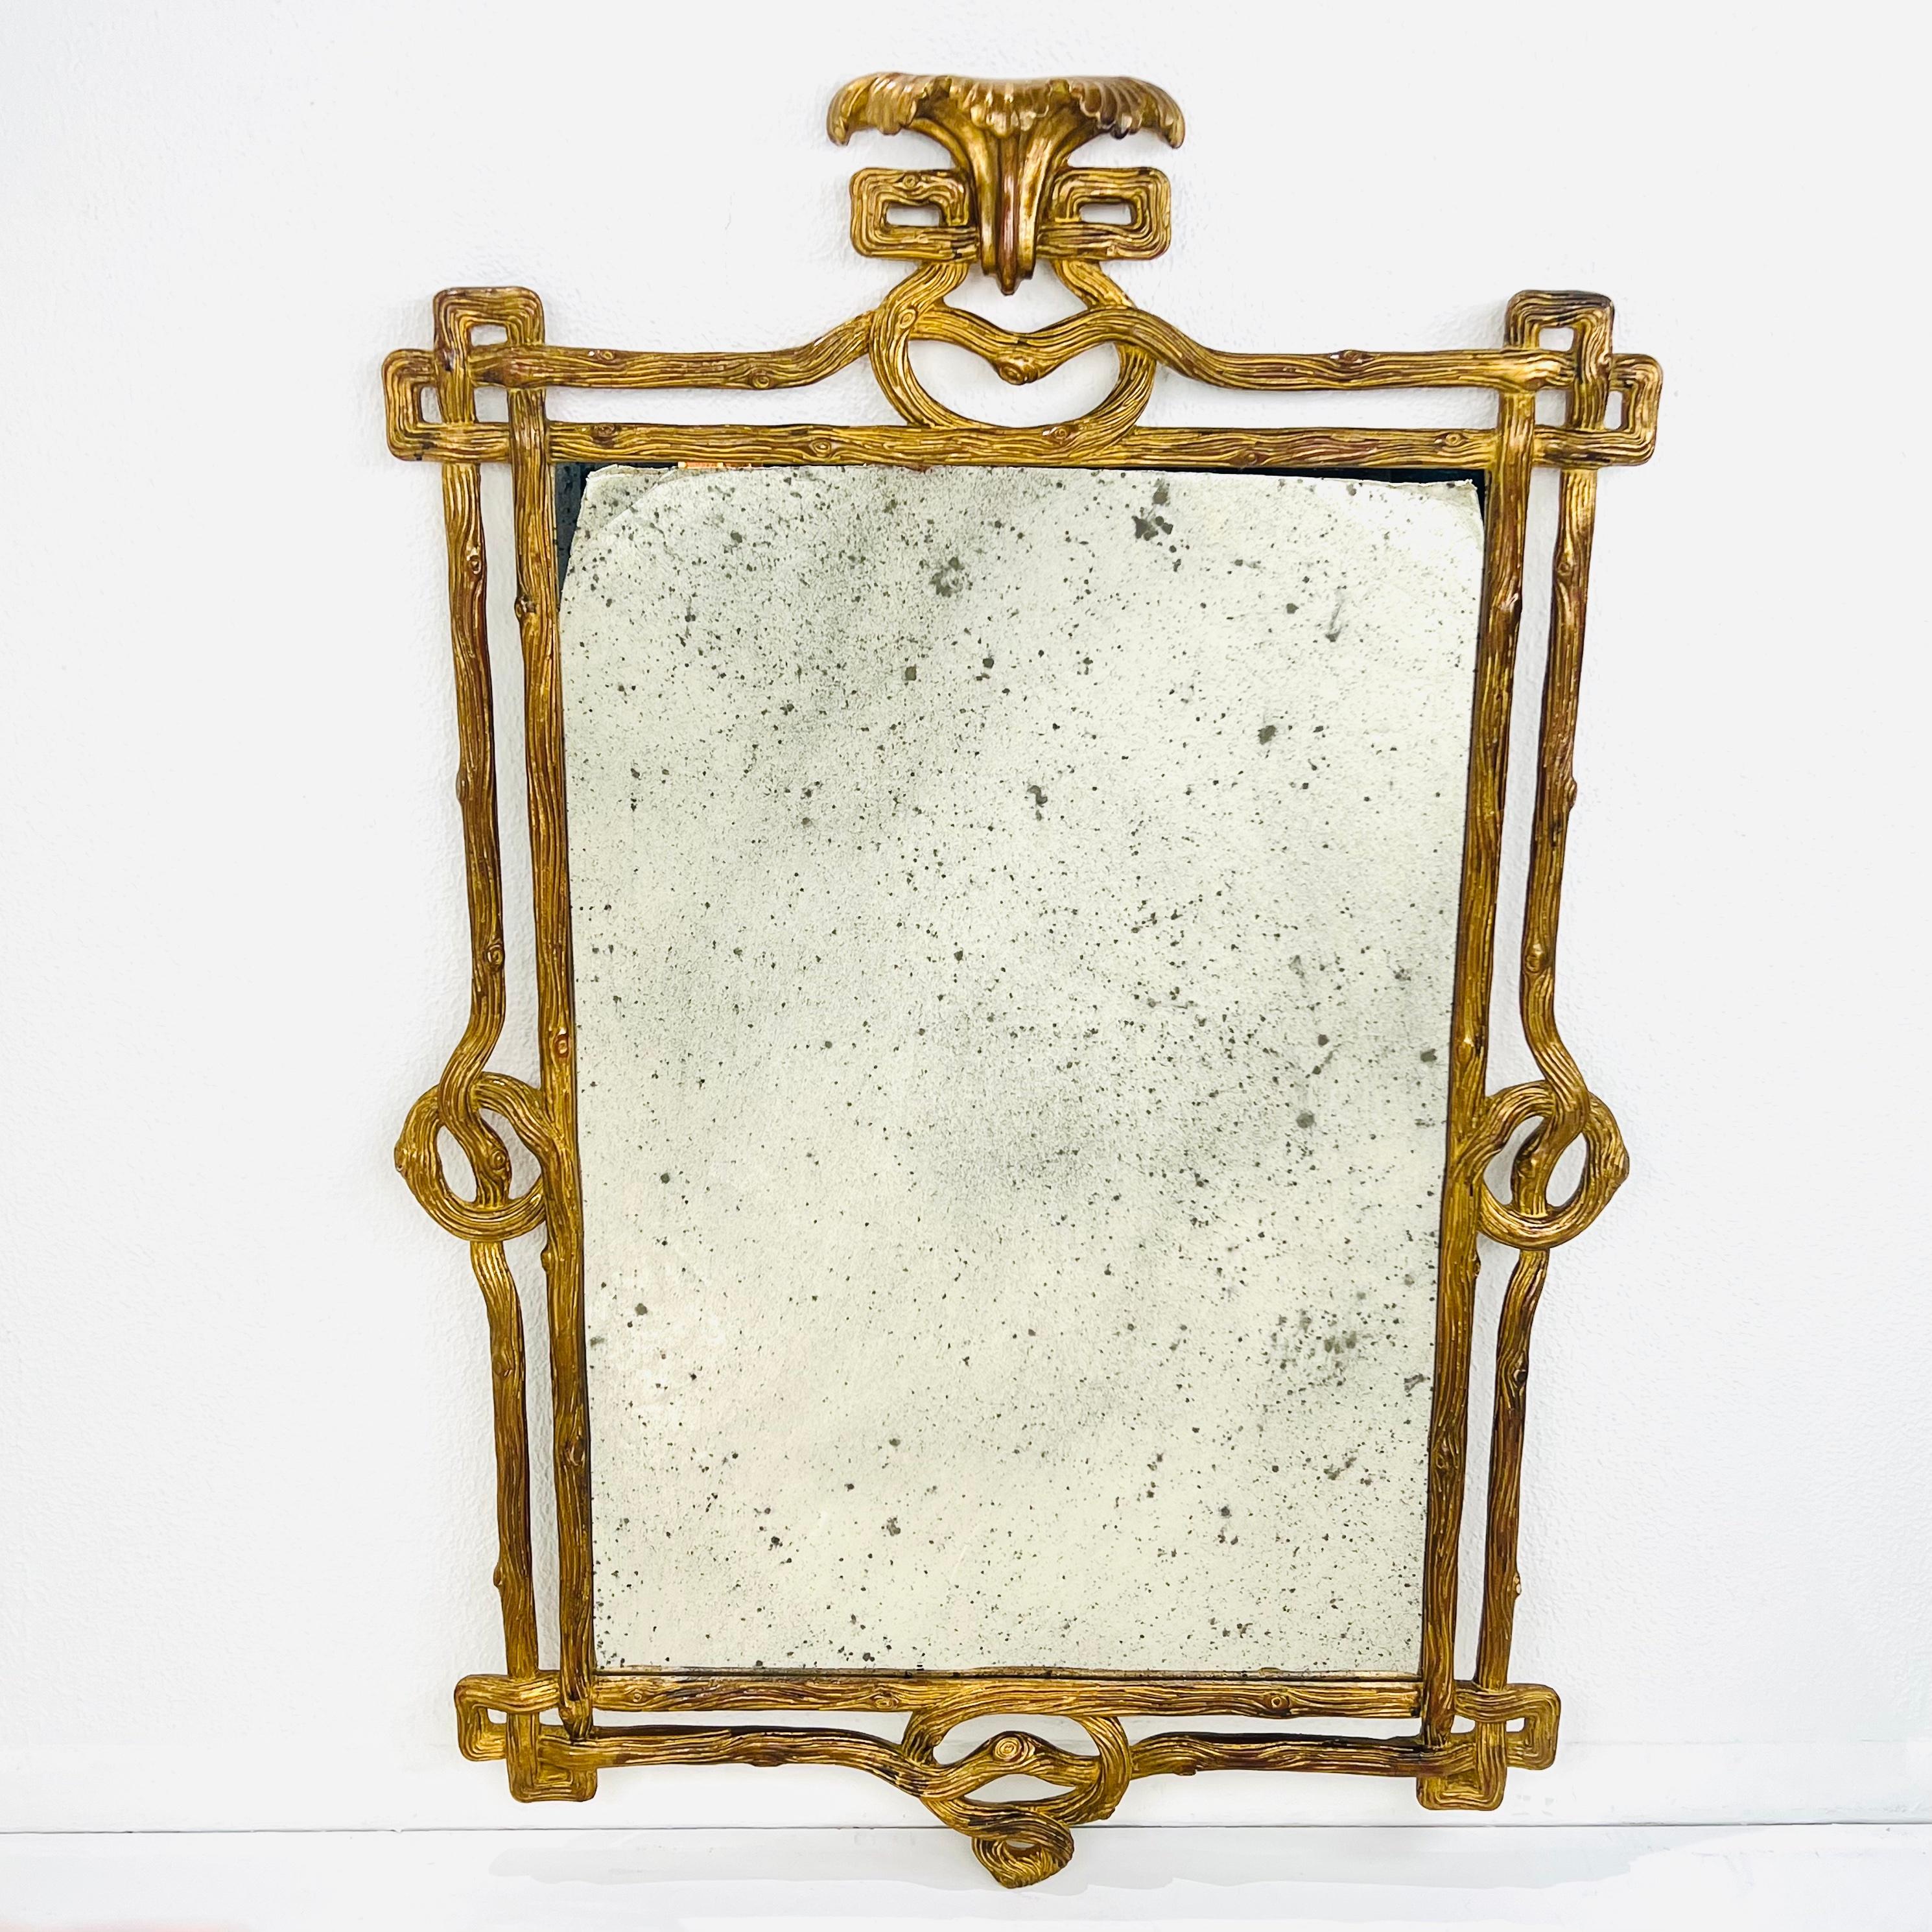 Carved wood branch frame featuring antique mirror and gold leaf finish. Created in Italy. Good condition with minimal wear from age and use. 